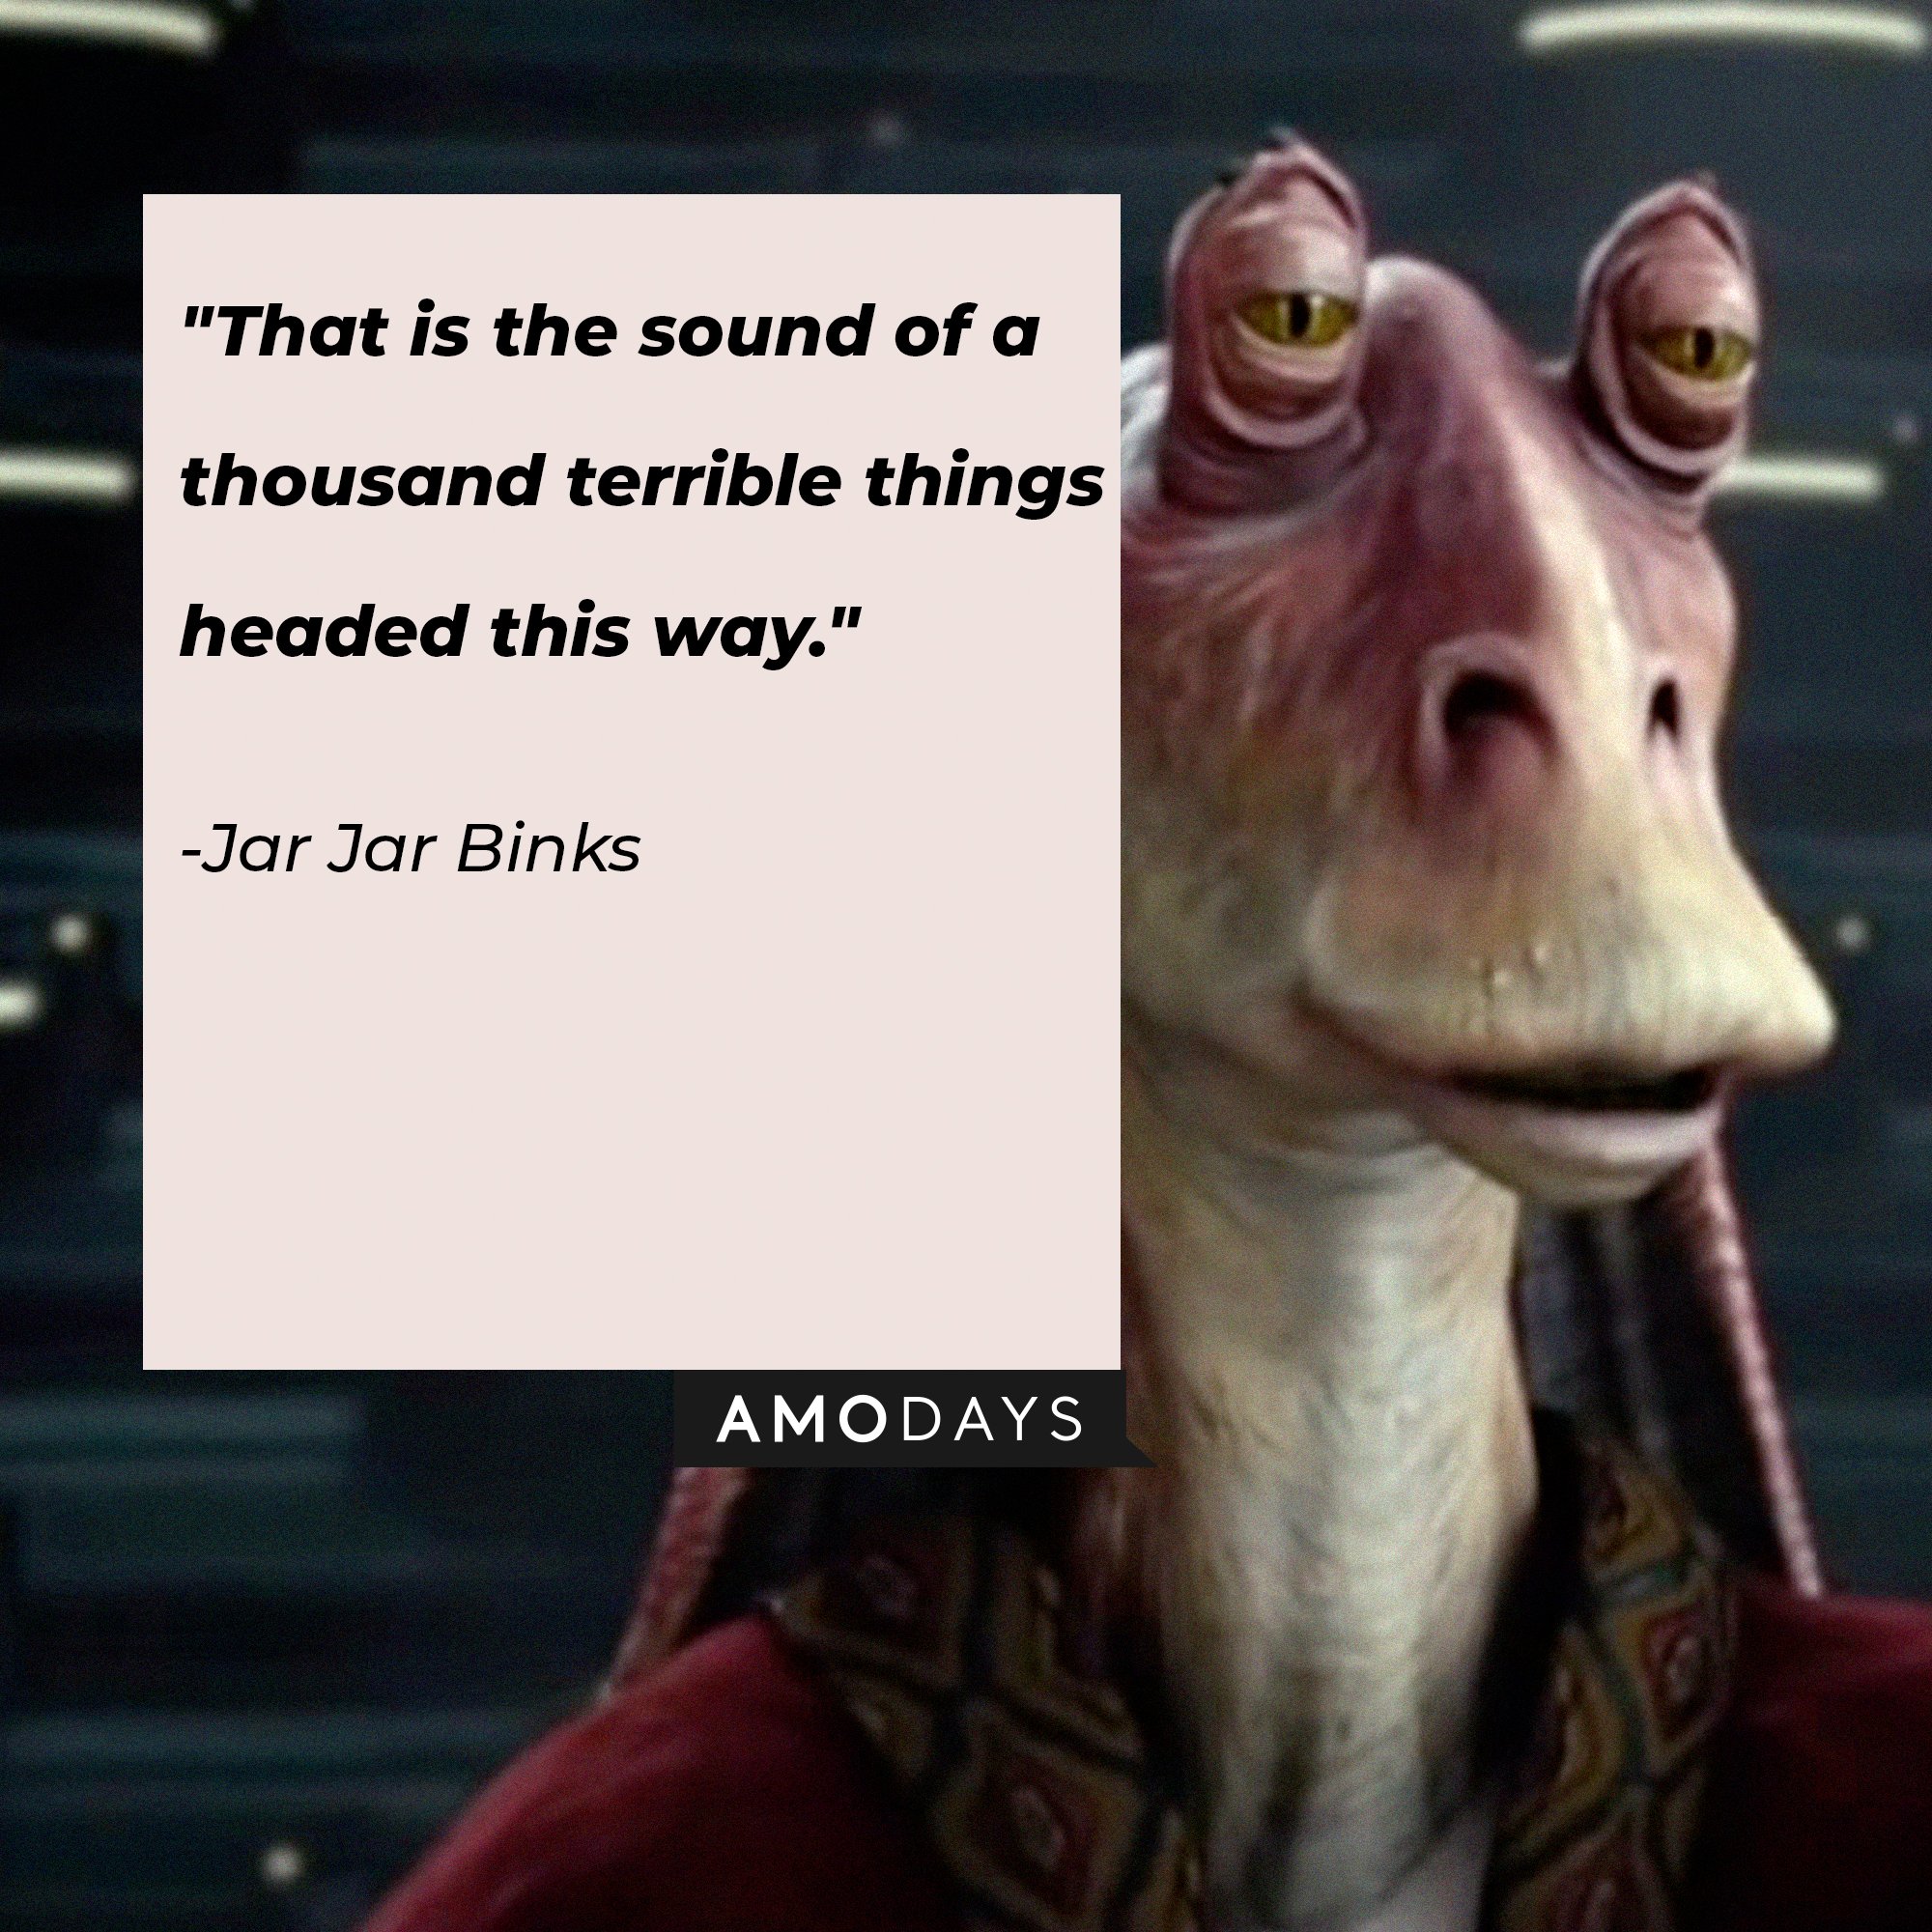  Jar Jar Binks’ quote: “That is the sound of a thousand terrible things headed this way.” | Image: AmoDays